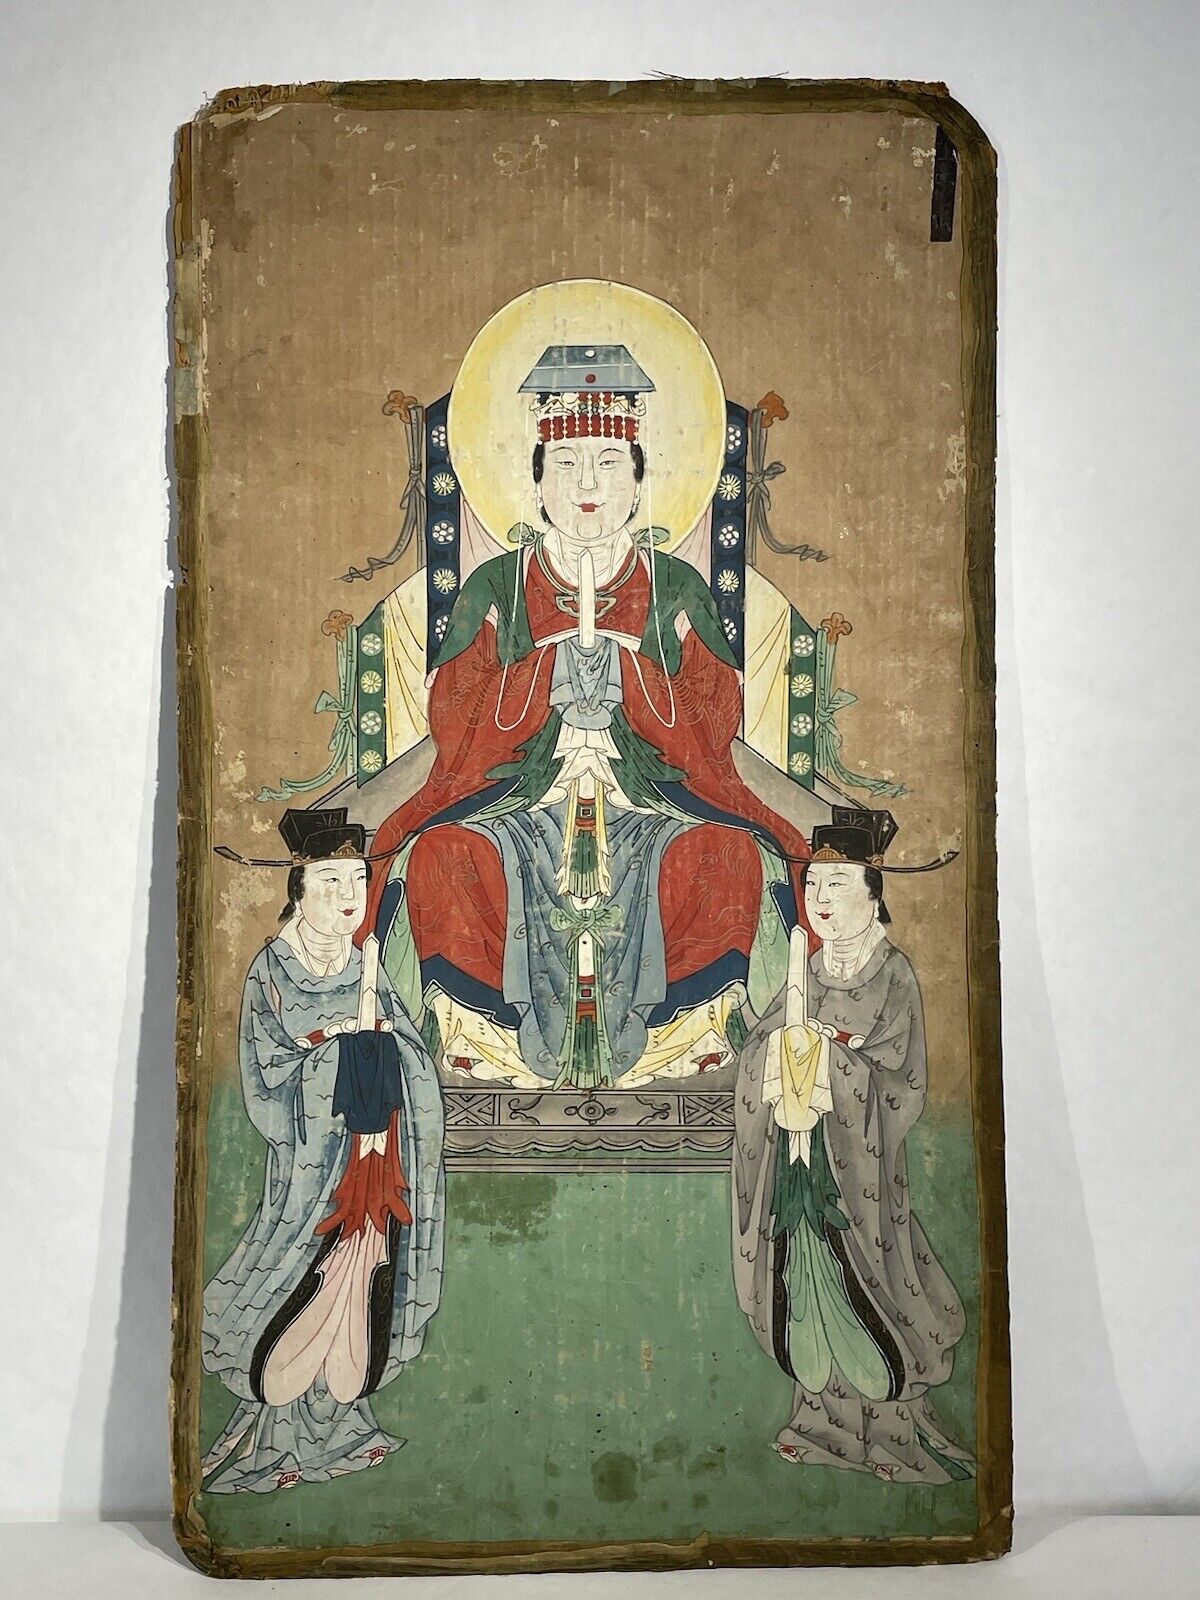 Antique Late 18th or Early 19th Century Korean Seated Deity Gouache on Paper